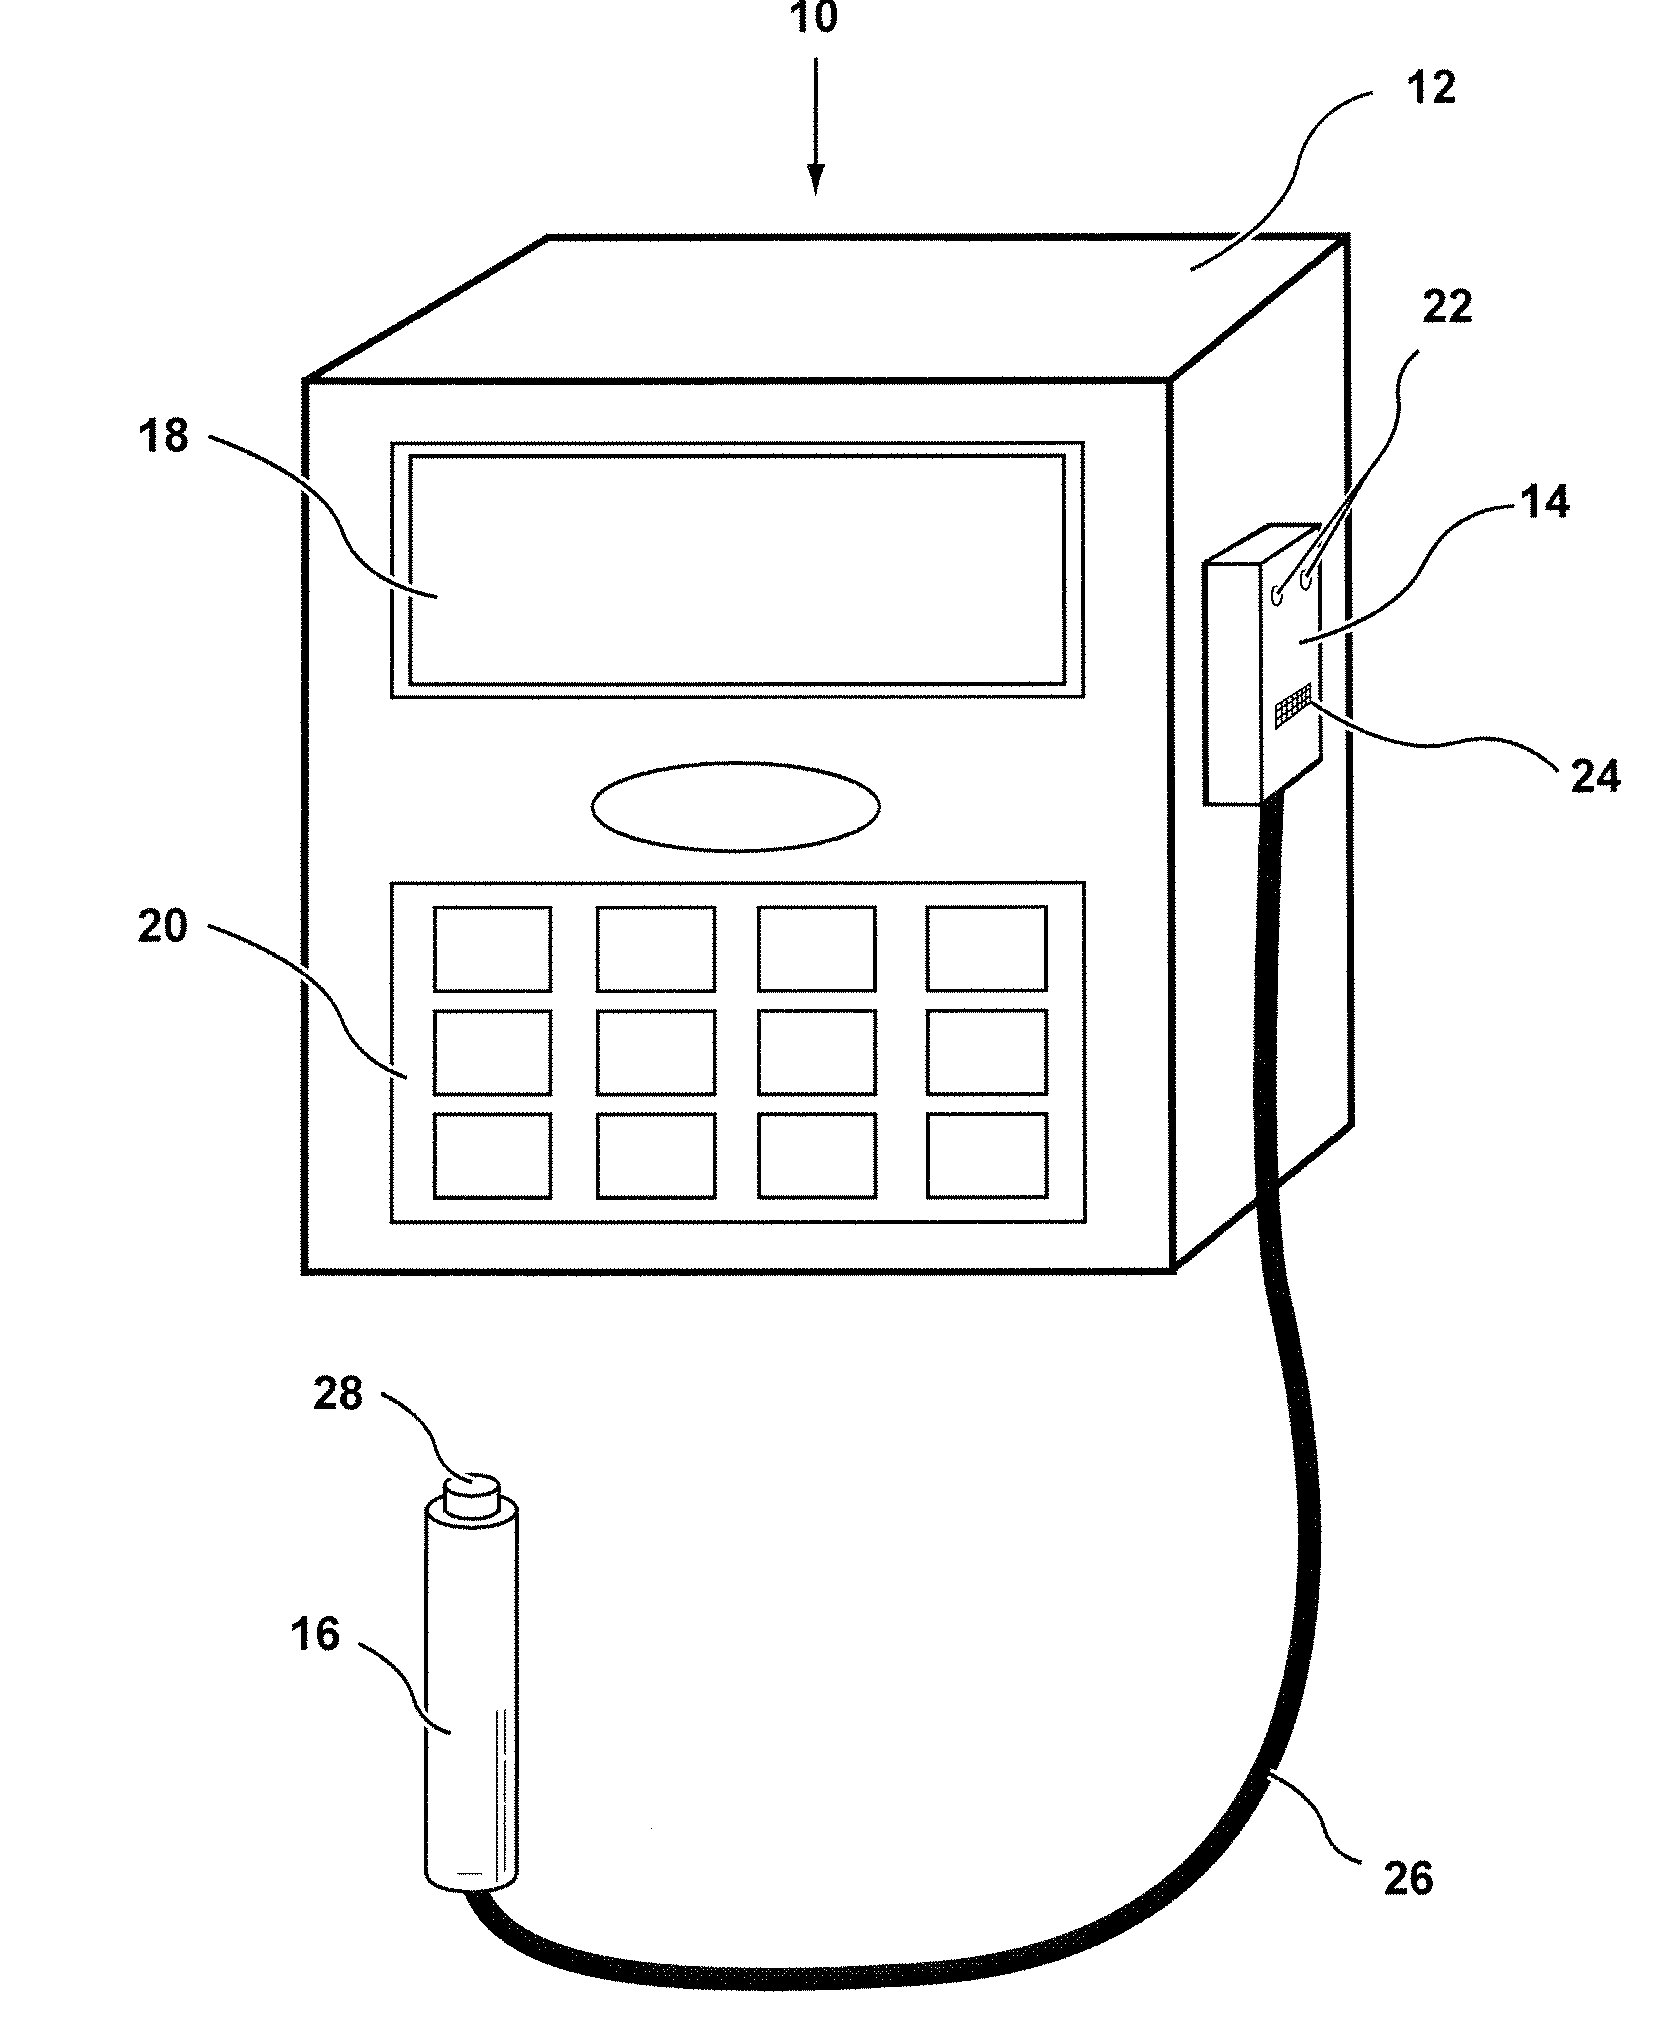 Patient controlled analgesia device and method of its use